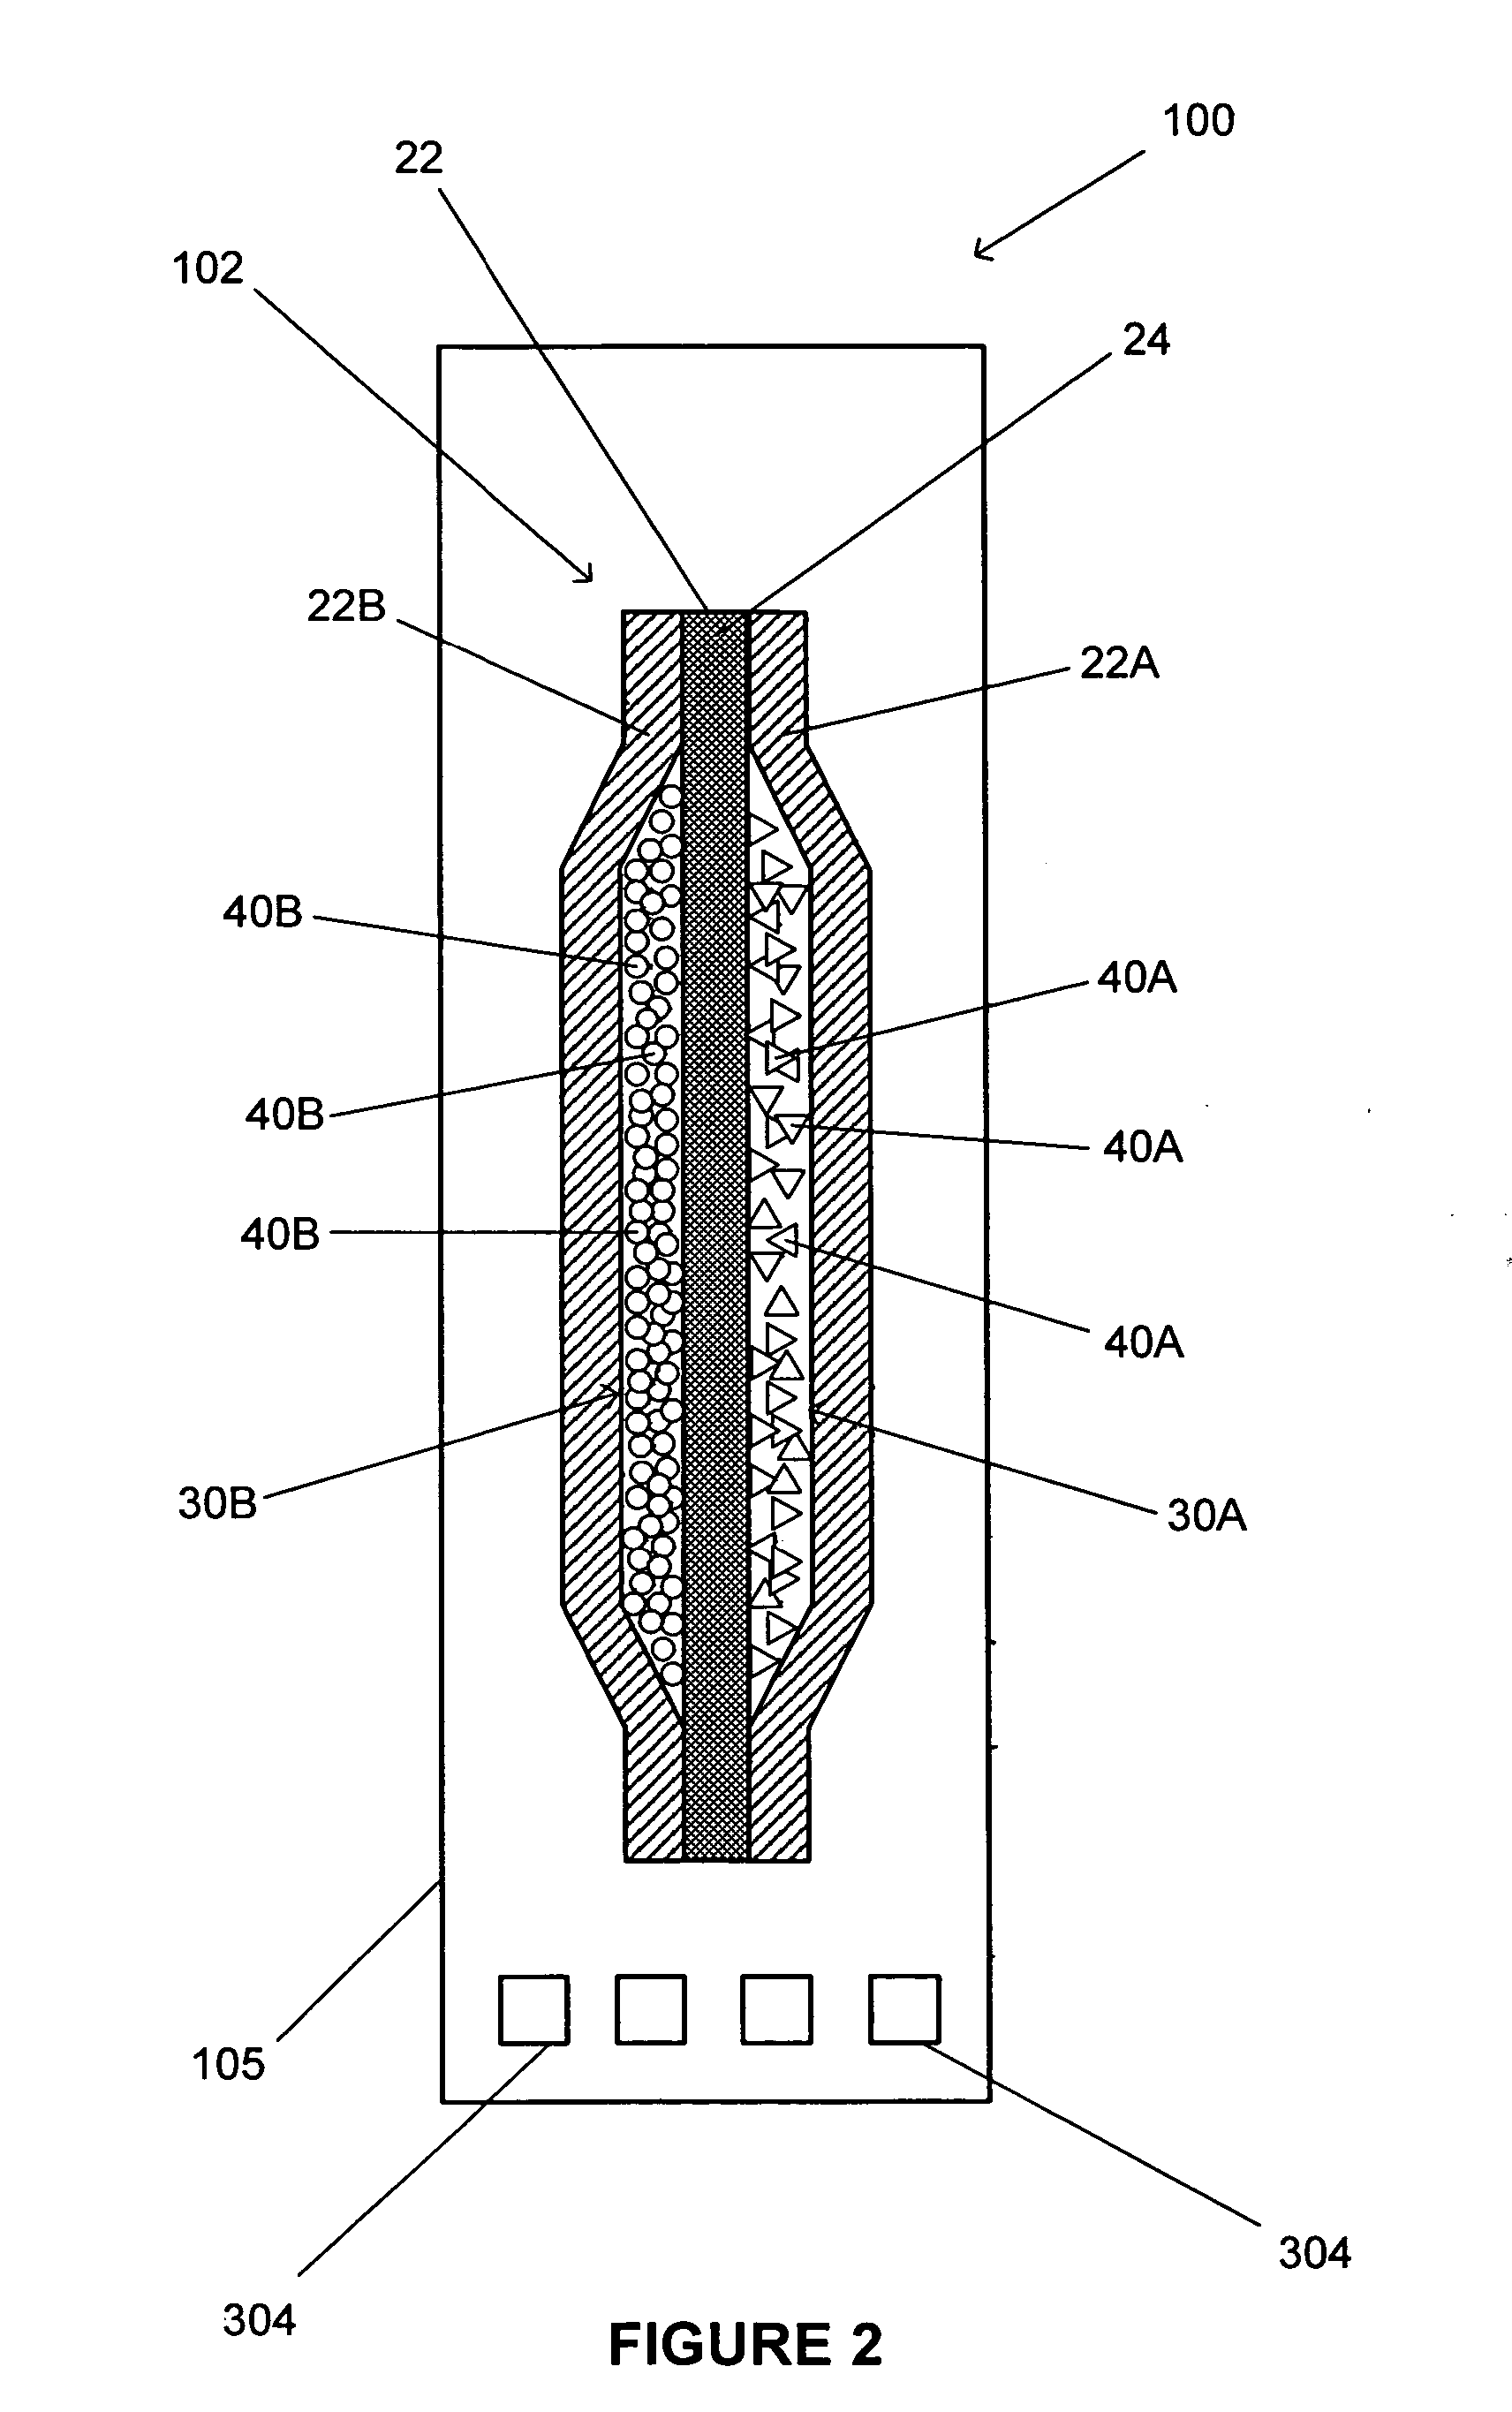 Systems and methods for producing aqueous solutions and gases having disinfecting properties and substantially eliminating impurities